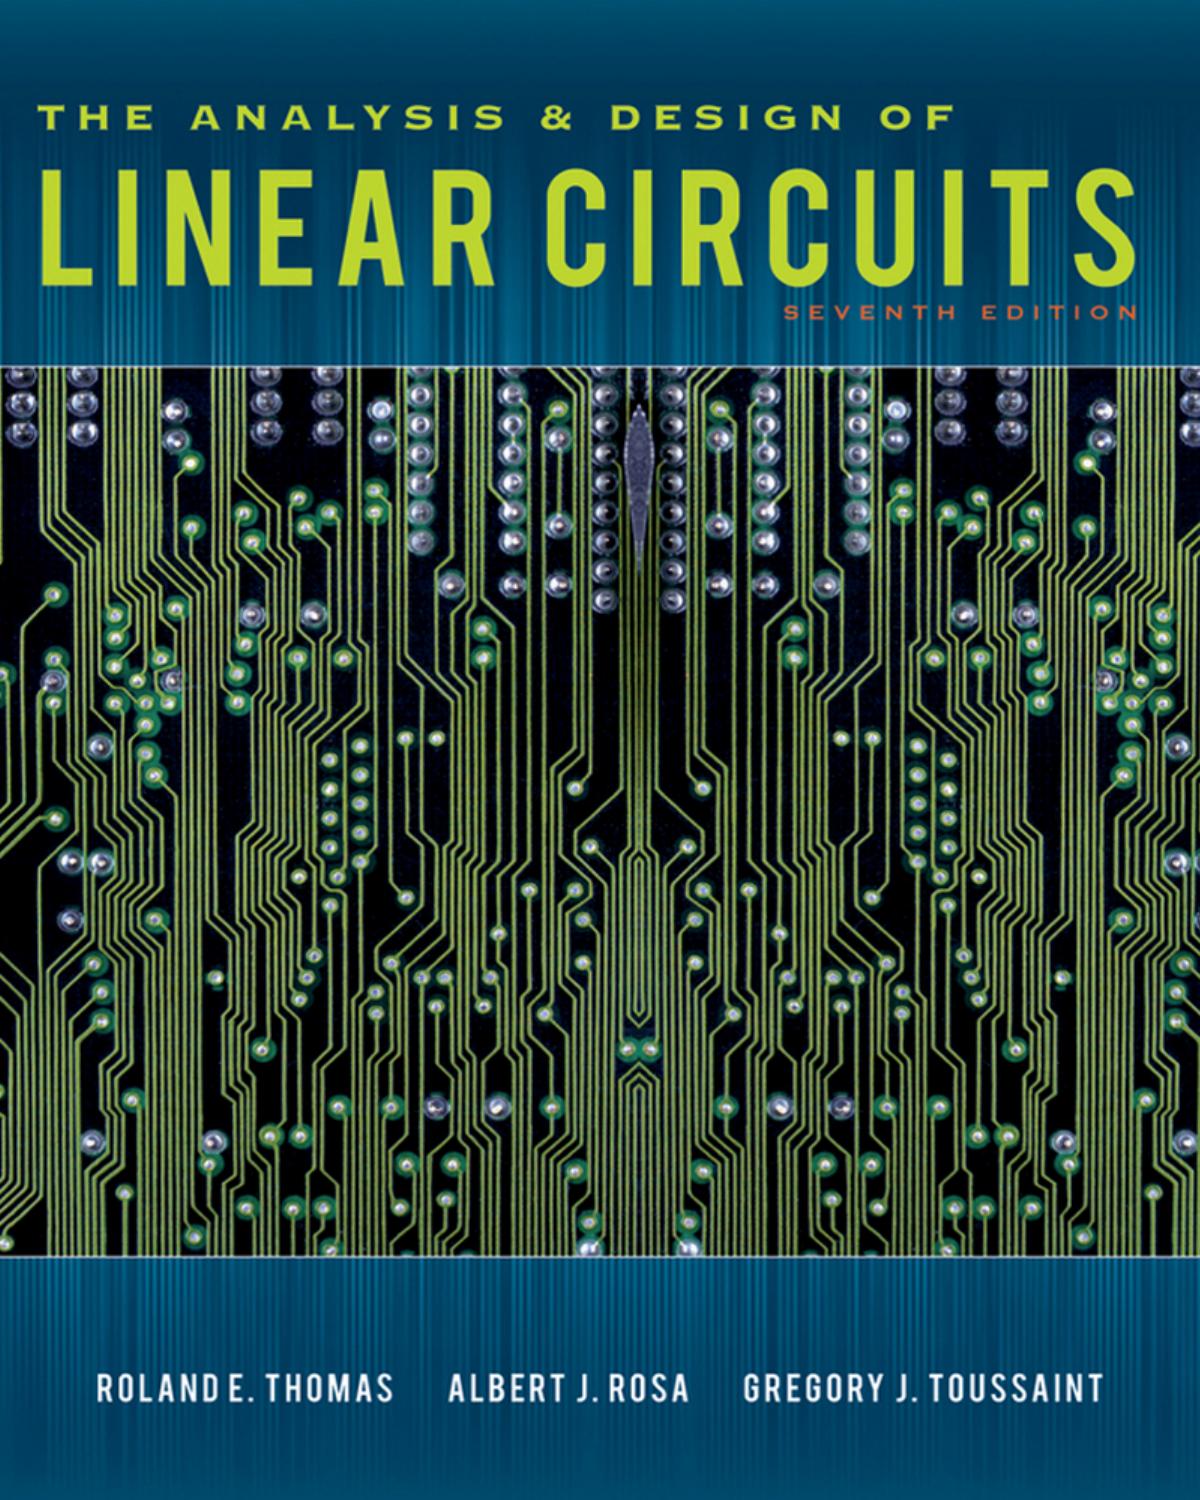 Analysis and Design of Linear Circuits 7th Edition by Roland E. Thomas 